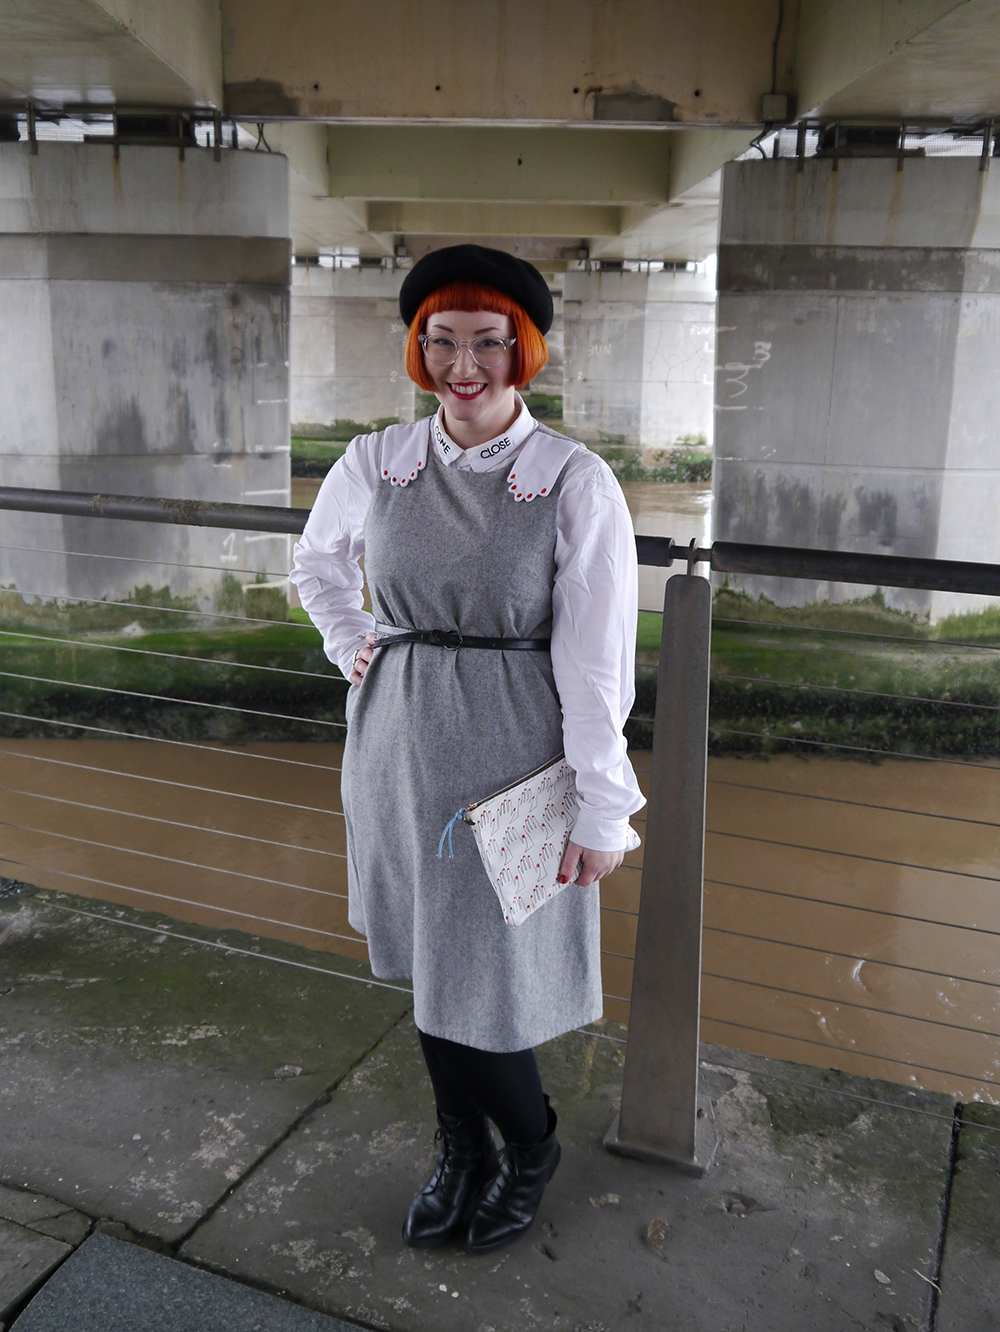 Scottish blogger, red head, ginger hair, pinafore, school style, The Whitepepper hand dress, white Monki come close shirt, black beret, clear Iolla glasses, hand print clutch bag, Falconwright printed leather clutch bag, Ted & Muffy black pointed boots, Cheap Frills best friend necklace, best withces, silver hand rings